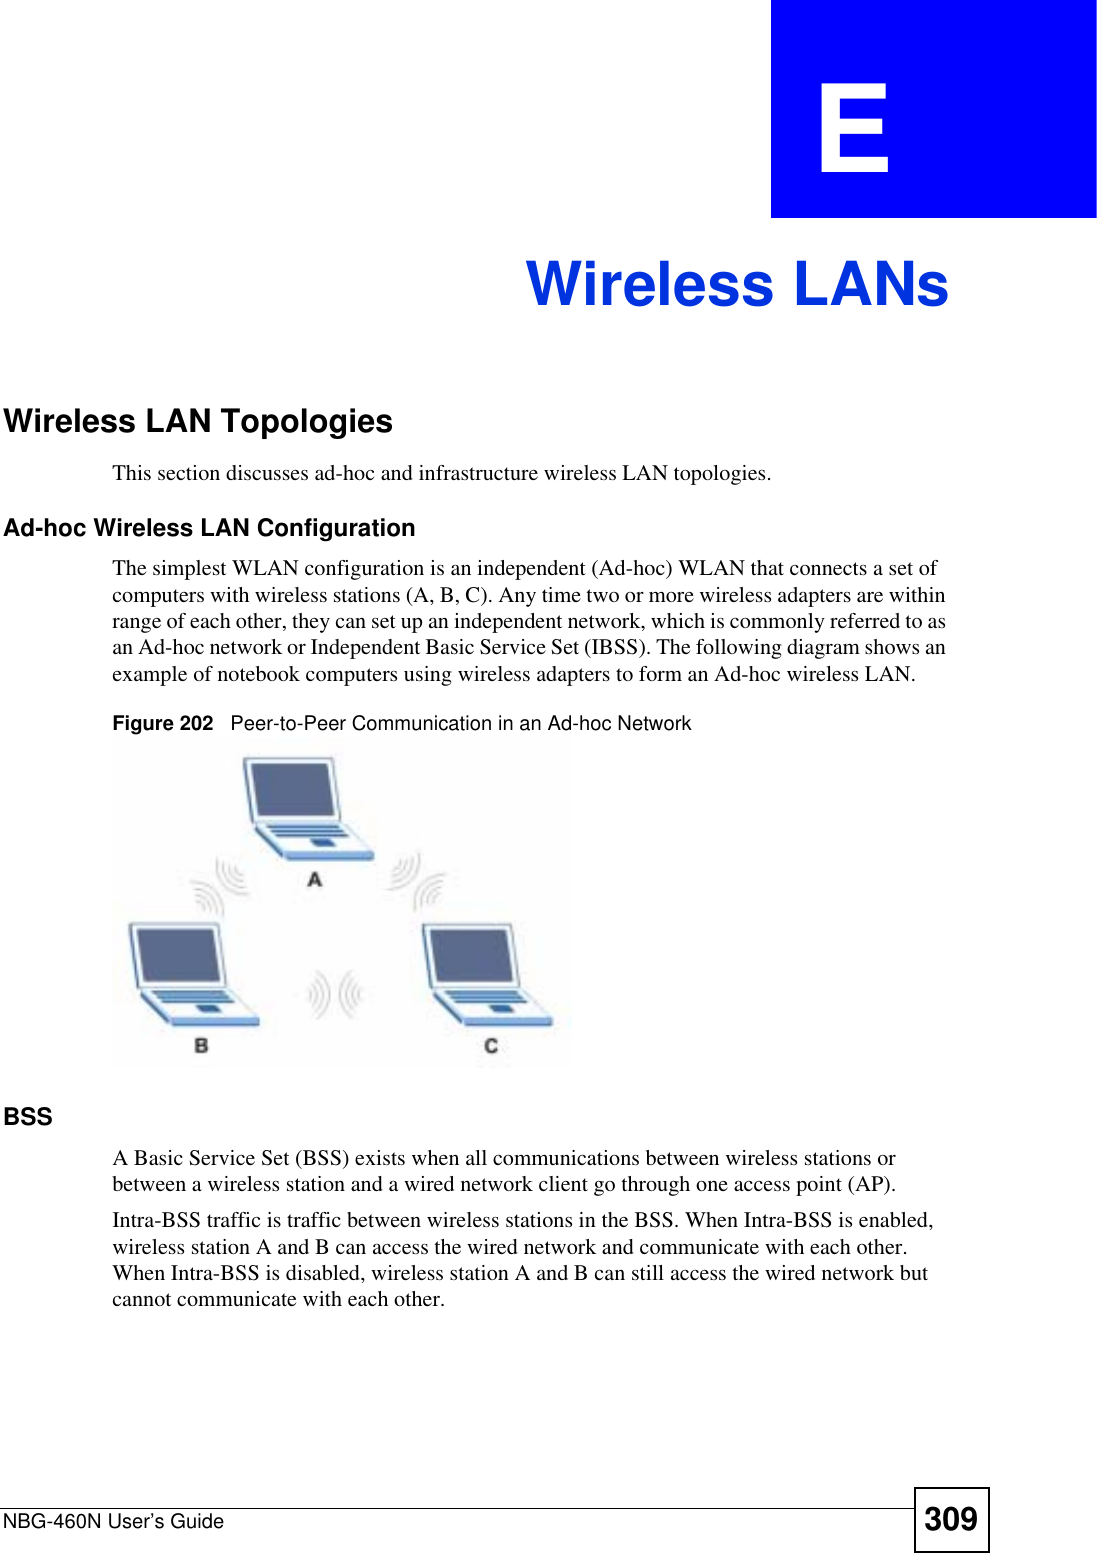 NBG-460N User’s Guide 309APPENDIX  E Wireless LANsWireless LAN TopologiesThis section discusses ad-hoc and infrastructure wireless LAN topologies.Ad-hoc Wireless LAN ConfigurationThe simplest WLAN configuration is an independent (Ad-hoc) WLAN that connects a set of computers with wireless stations (A, B, C). Any time two or more wireless adapters are within range of each other, they can set up an independent network, which is commonly referred to as an Ad-hoc network or Independent Basic Service Set (IBSS). The following diagram shows an example of notebook computers using wireless adapters to form an Ad-hoc wireless LAN. Figure 202   Peer-to-Peer Communication in an Ad-hoc NetworkBSSA Basic Service Set (BSS) exists when all communications between wireless stations or between a wireless station and a wired network client go through one access point (AP). Intra-BSS traffic is traffic between wireless stations in the BSS. When Intra-BSS is enabled, wireless station A and B can access the wired network and communicate with each other. When Intra-BSS is disabled, wireless station A and B can still access the wired network but cannot communicate with each other.